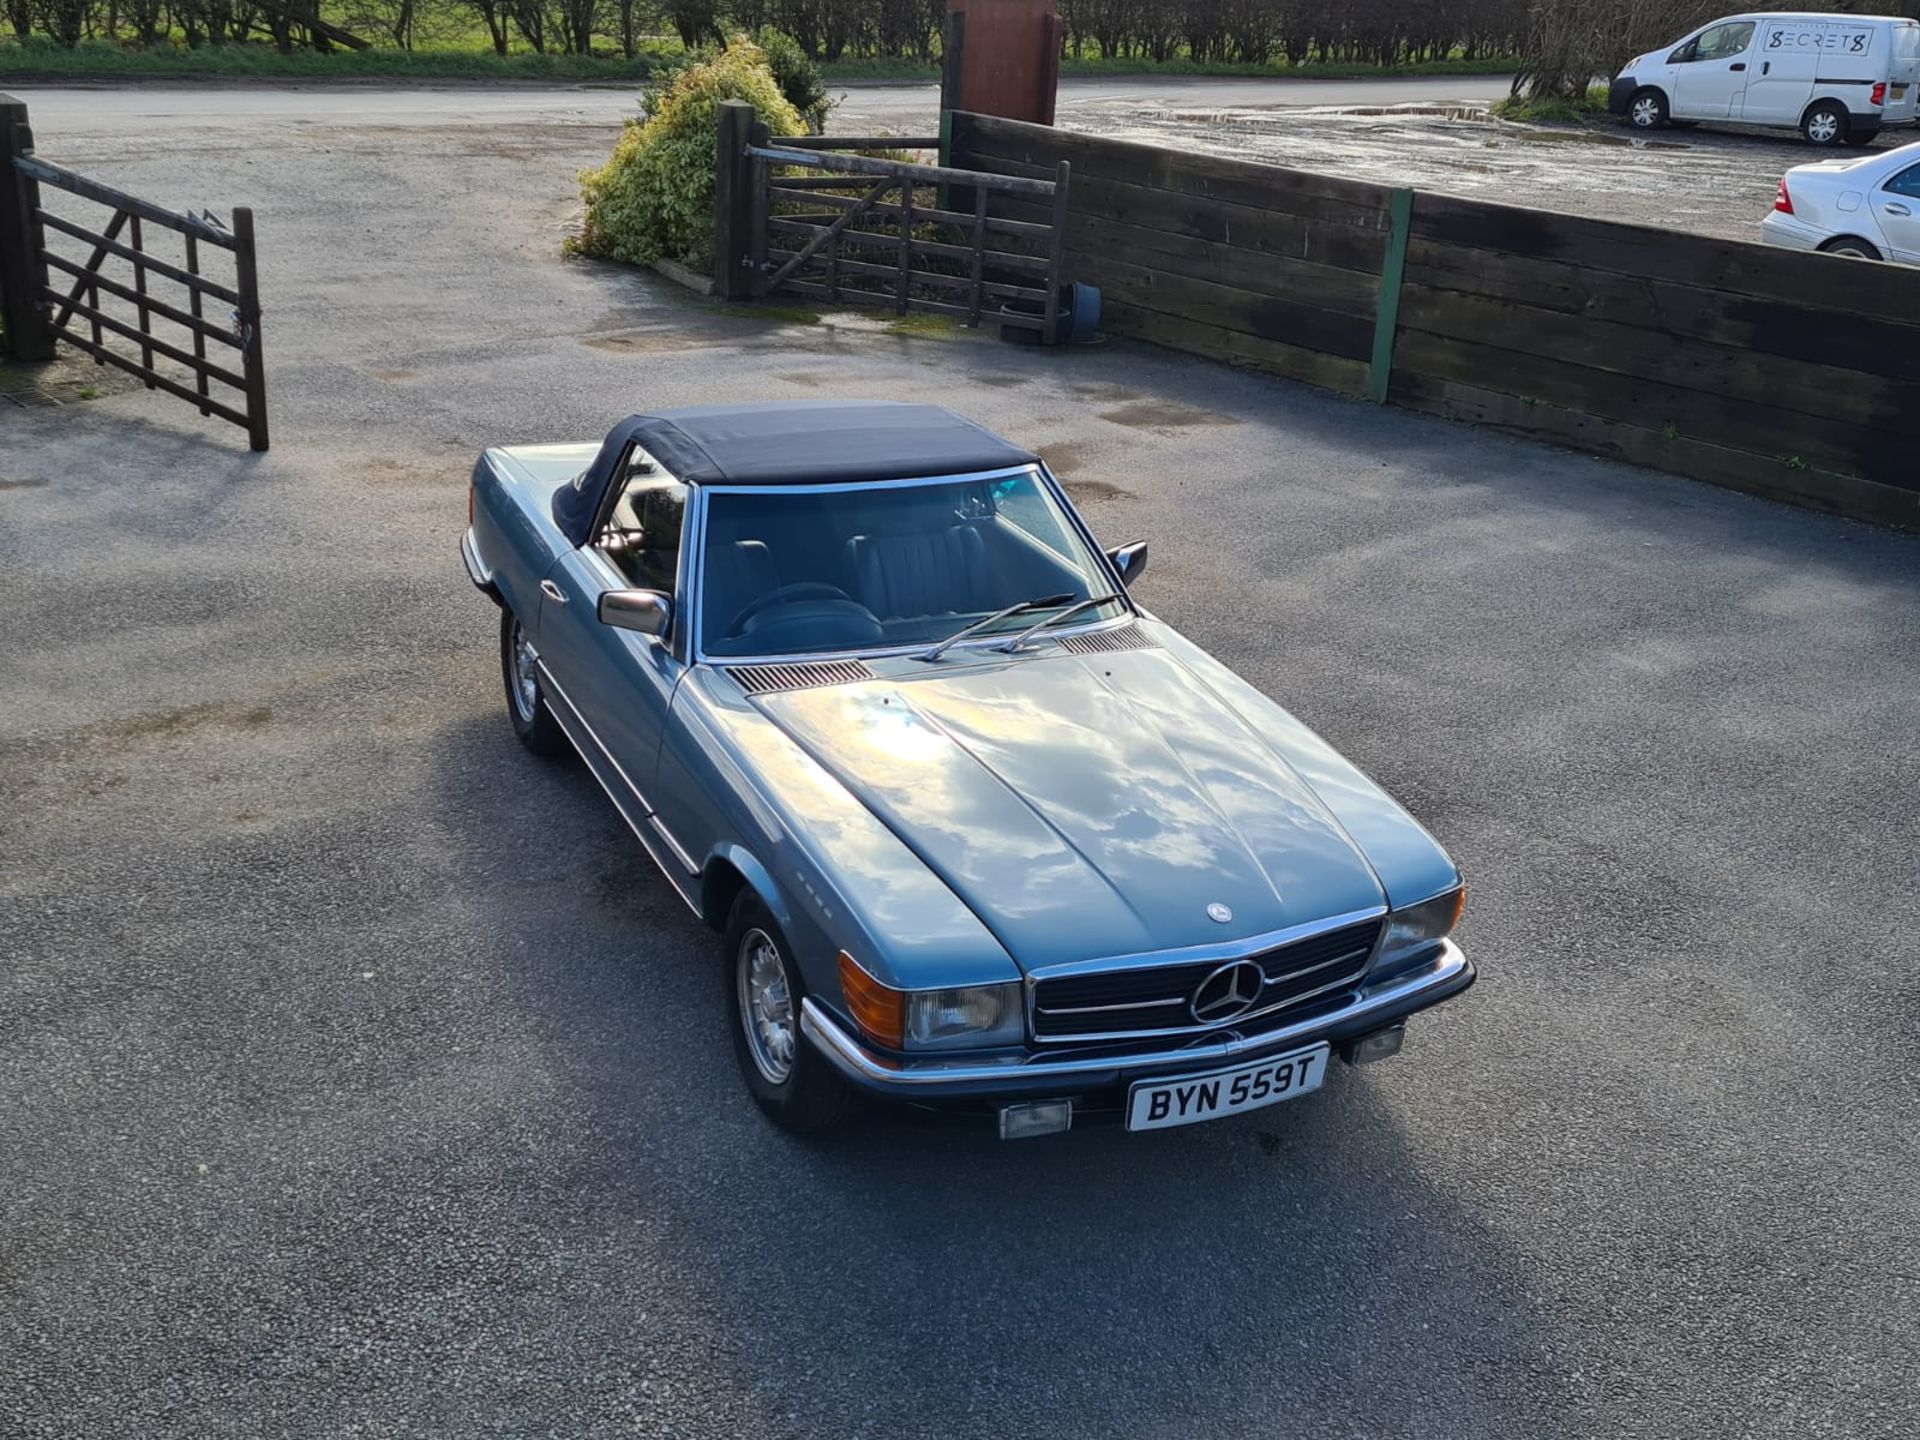 Stunning 1979 Mercedes Benz SL350 V8 With Factory Hardtop - Restored in 2018 - Image 11 of 22